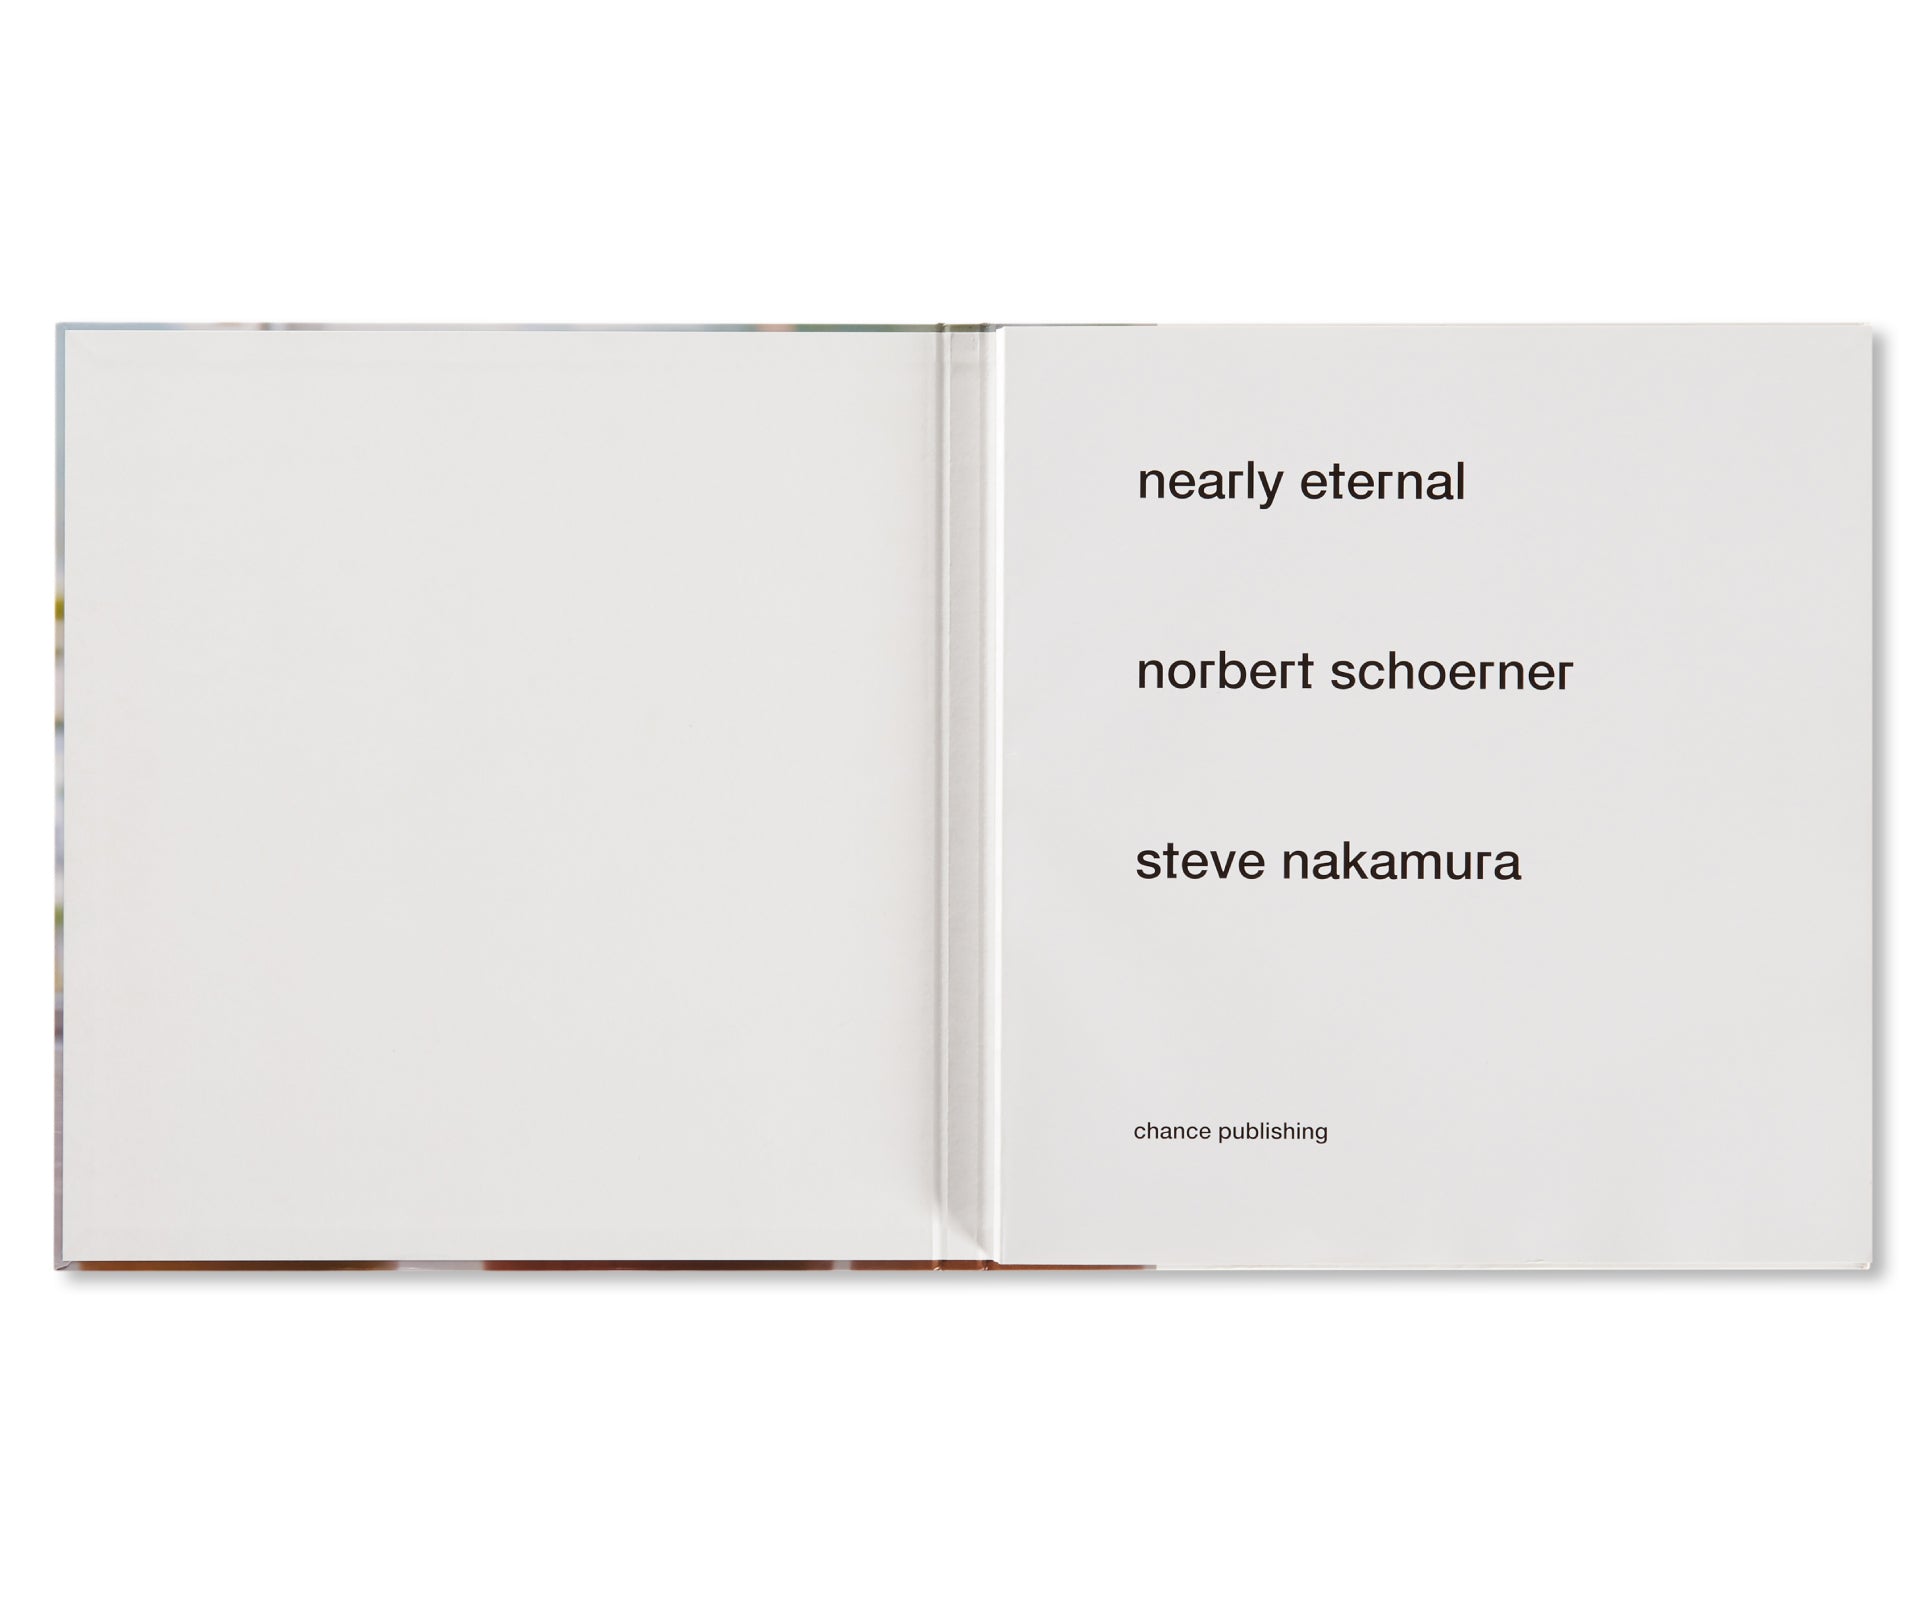 NEARLY ETERNAL by Norbert Schoerner & Steve Nakamura [SECOND EDITION / SIGNED]